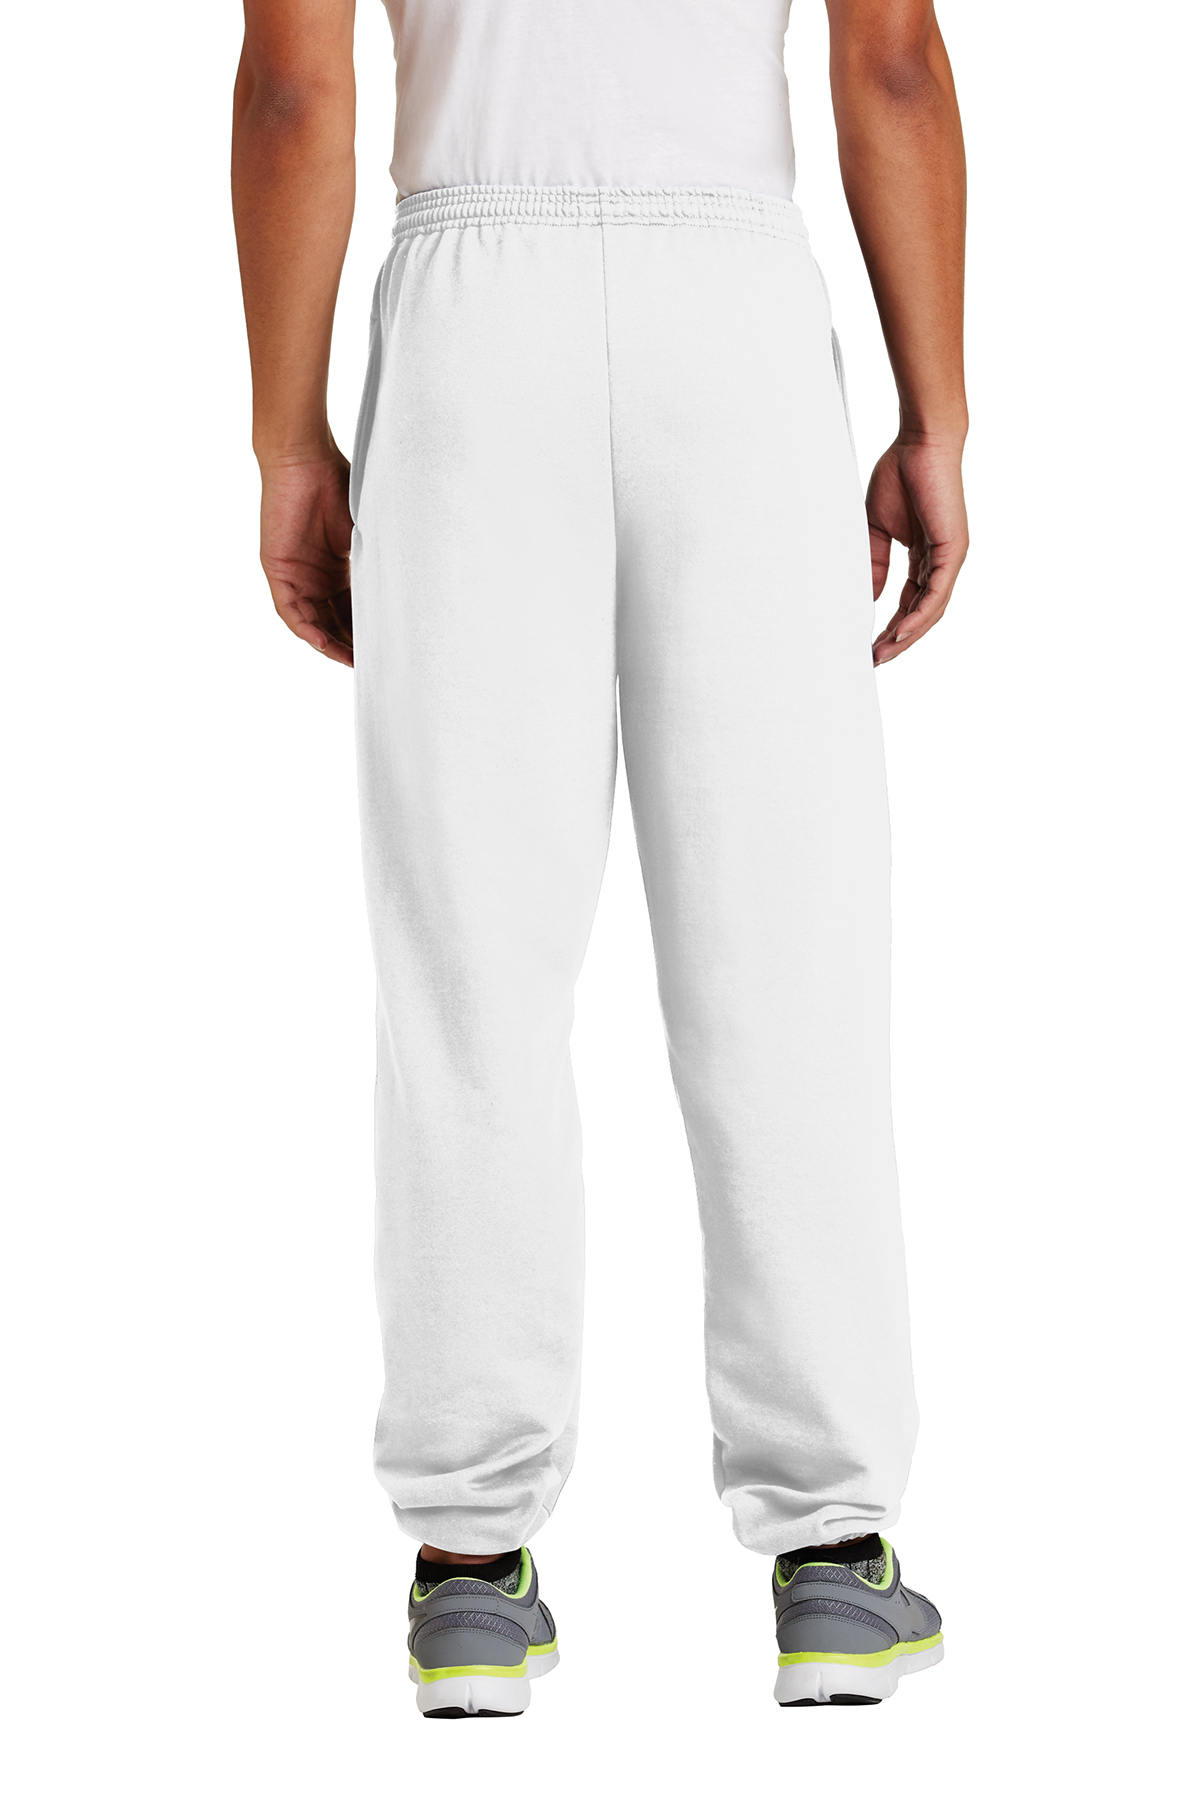 Port & Company - Essential Fleece Sweatpant with Pockets | Product ...